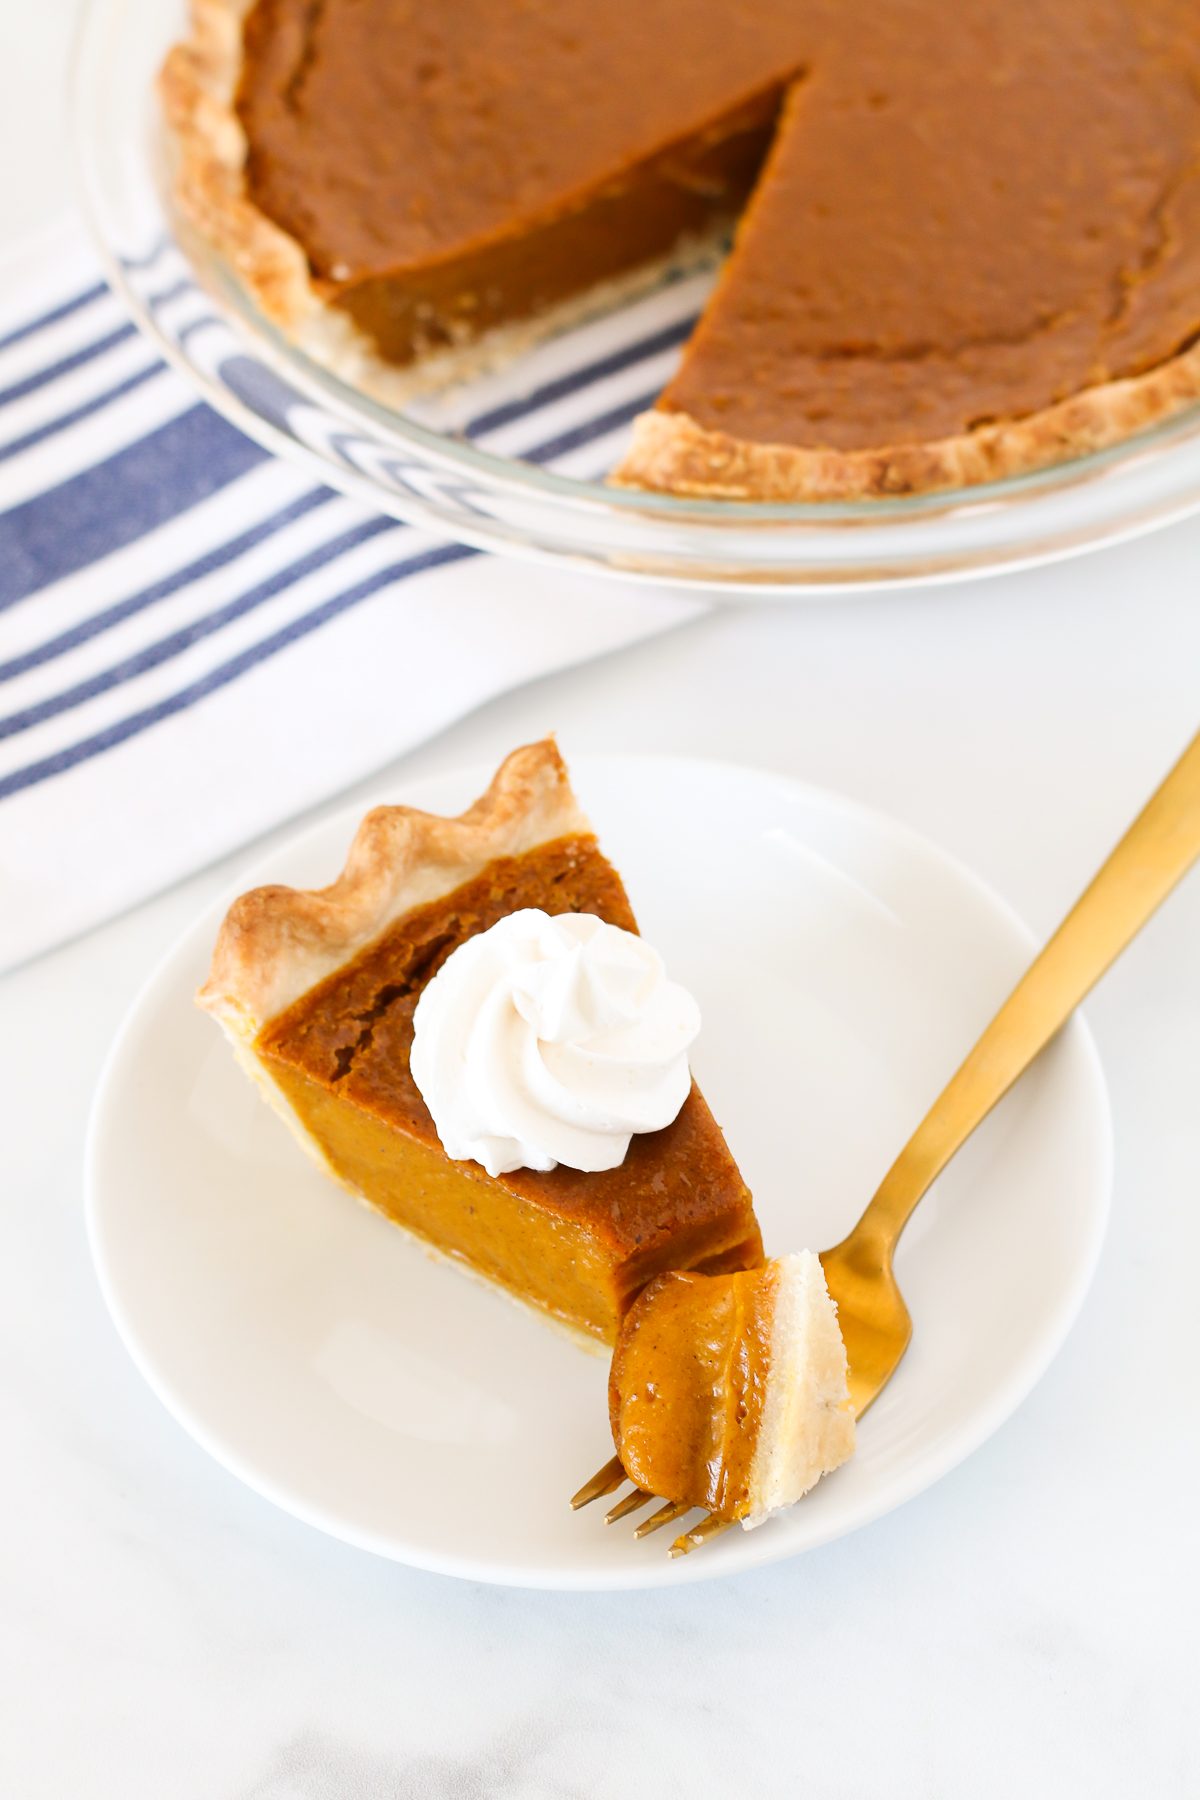 Gluten Free Vegan Pumpkin Pie. This creamy, perfectly spiced pumpkin pie is well suited for any holiday gathering!